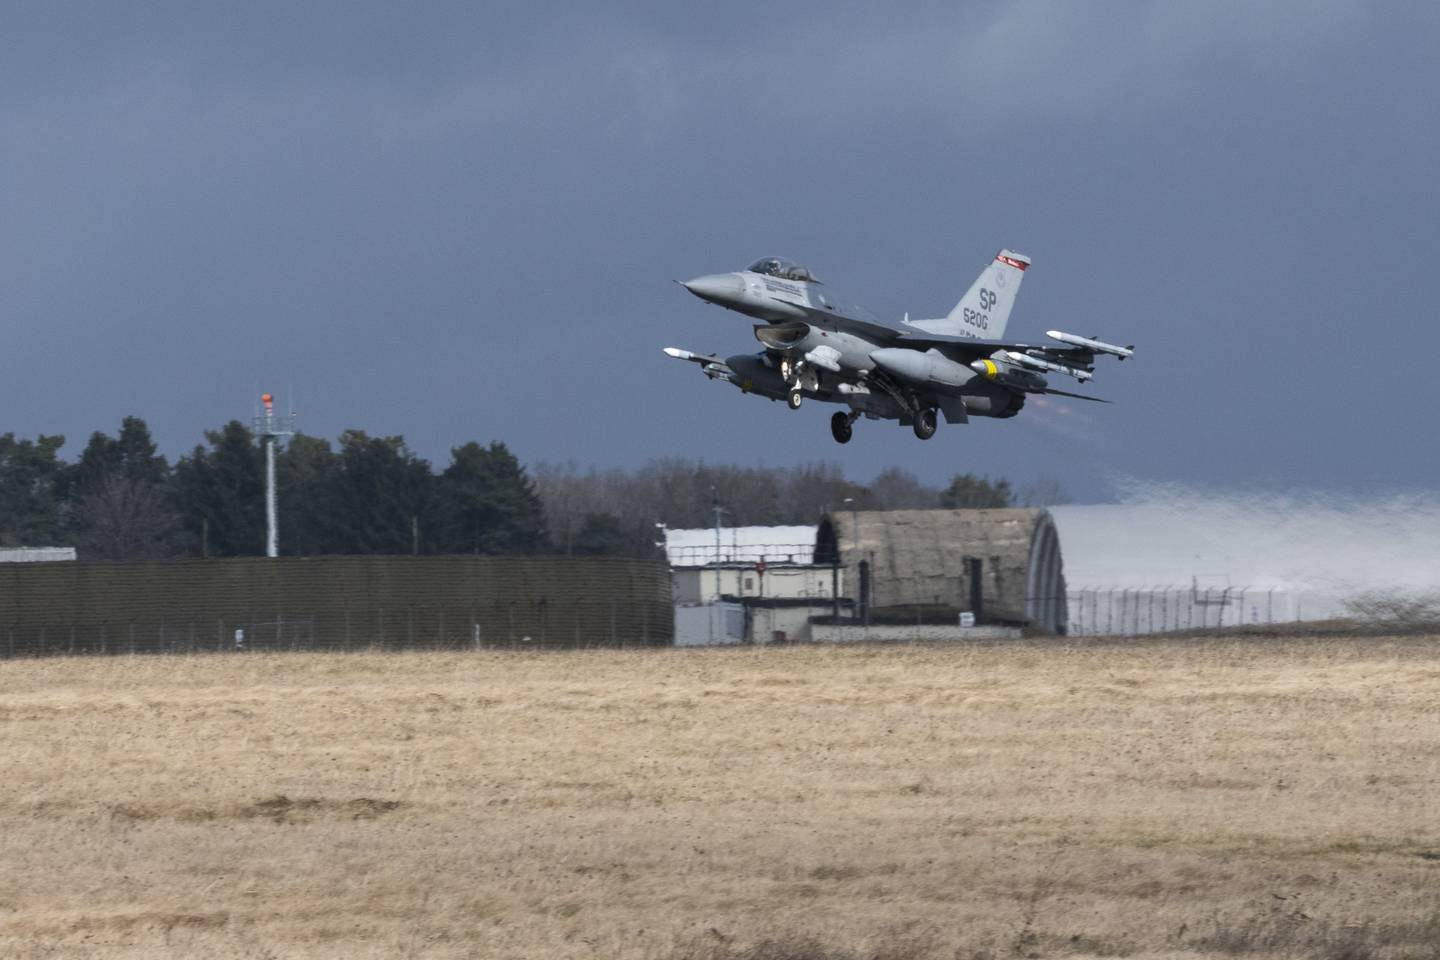 U.S. Air Force F-16 Fighting Falcons from the 480th Fighter Squadron, 52nd Fighter Wing, departed Spangdahlem Air Base, Germany, Feb. 11, 2022, to enhance NATO’s air policing mission and integrate with allies and partners in the Black Sea region. The fighter aircraft, personnel and support equipment will operate from Fetesti Air Base, Romania. (Tech. Sgt. Maeson L. Elleman/Air Force)